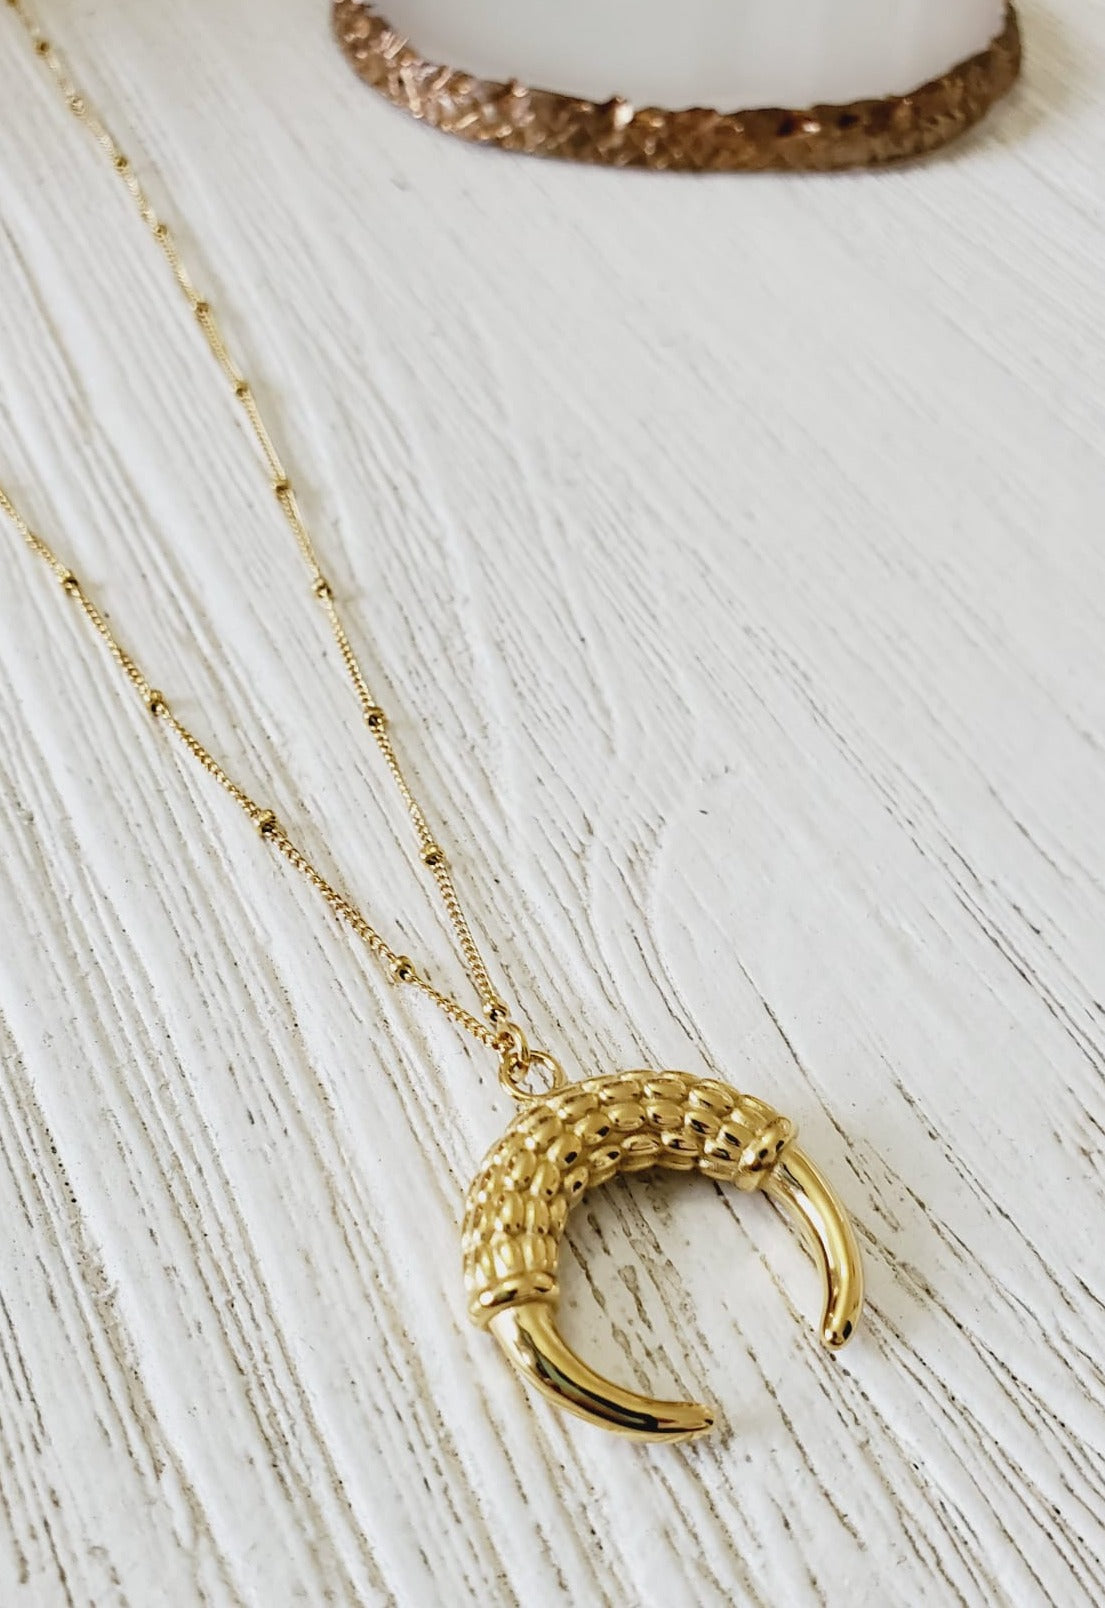 Minimalist chain, Gold filled Chain, Flat Gold Necklace, Snake Chain, Water resistant jewelry, water resistant Necklace, Water resistant bracelet, vintage jewelry, vintage jewelry, vintage necklace, 14k gold necklace, 14k gold jewelry, 14k gold necklace, fine jewelry, fine necklace, fine bracelet, snake gold necklace, bold necklace, bold jewelry, handmade jewelry, fine jewelry brand, hello luxy, joyeria fina, gold plated chain, 18k gold plated chain, horn necklace, textured horn necklace